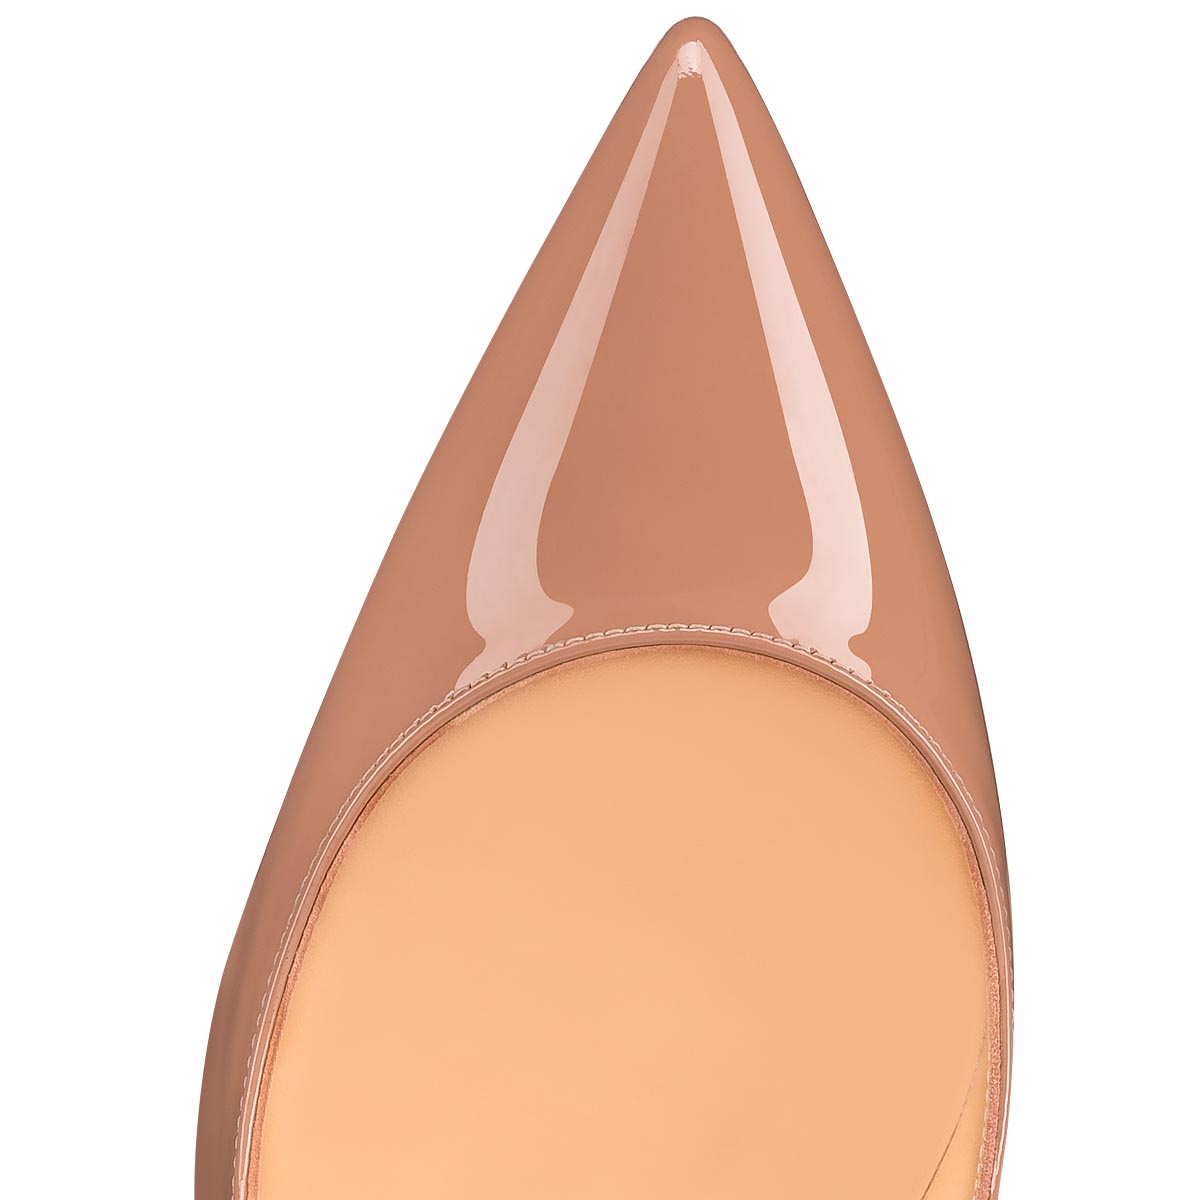 CHRISTIAN LOUBOUTIN So Kate 120mm in Patent Nude - More Than You Can Imagine